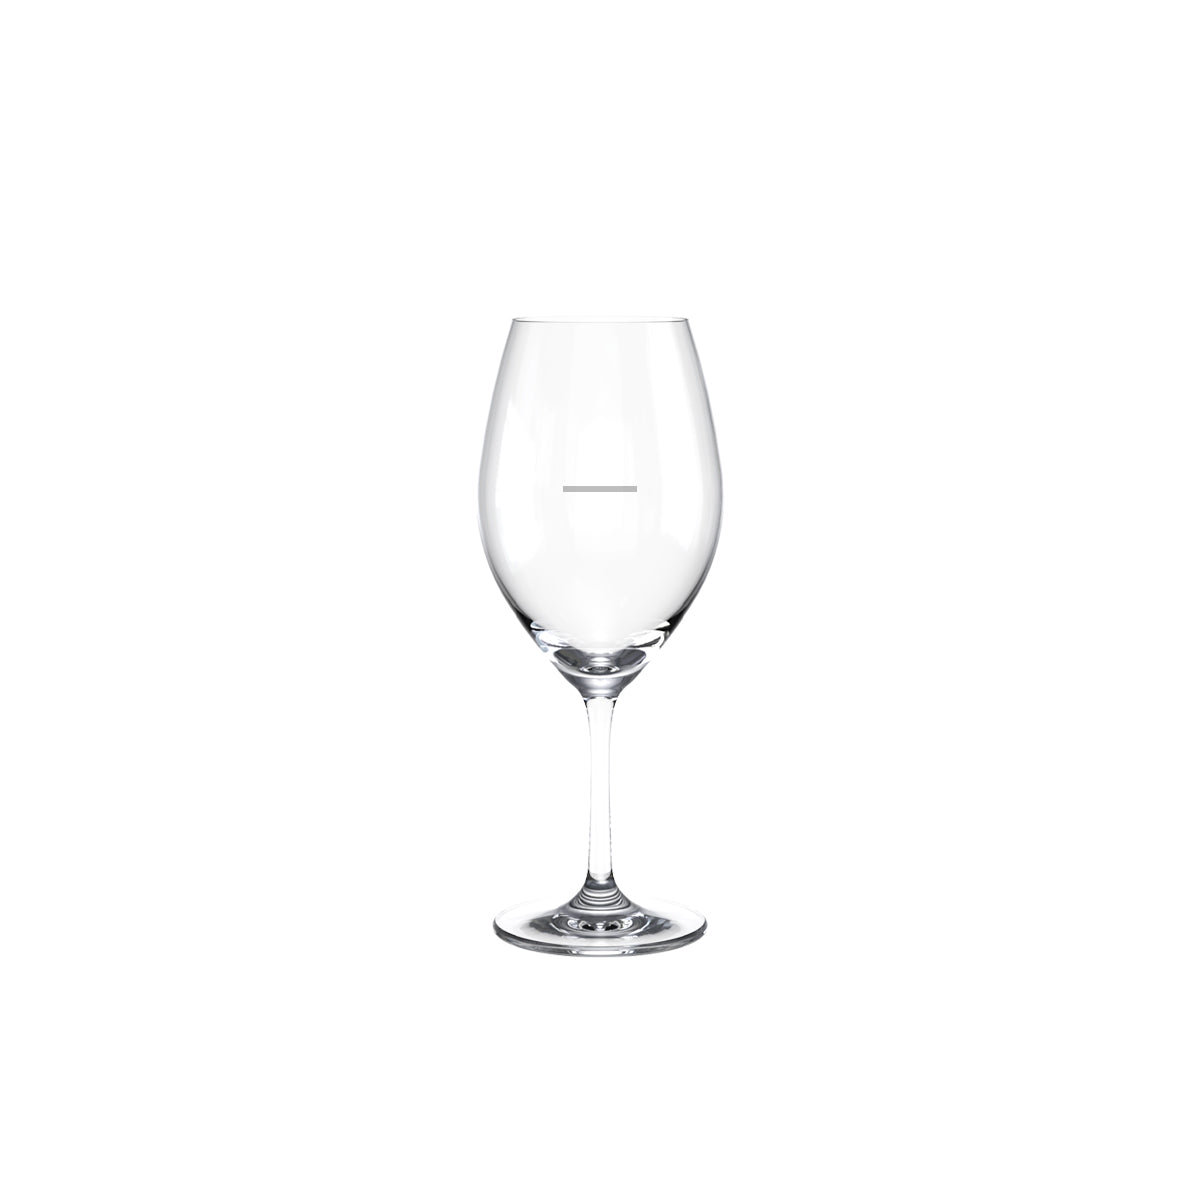 Melody Chianti - 375Ml, Pour Line from Ryner Glass. Pour line printed and sold in boxes of 24. Hospitality quality at wholesale price with The Flying Fork! 